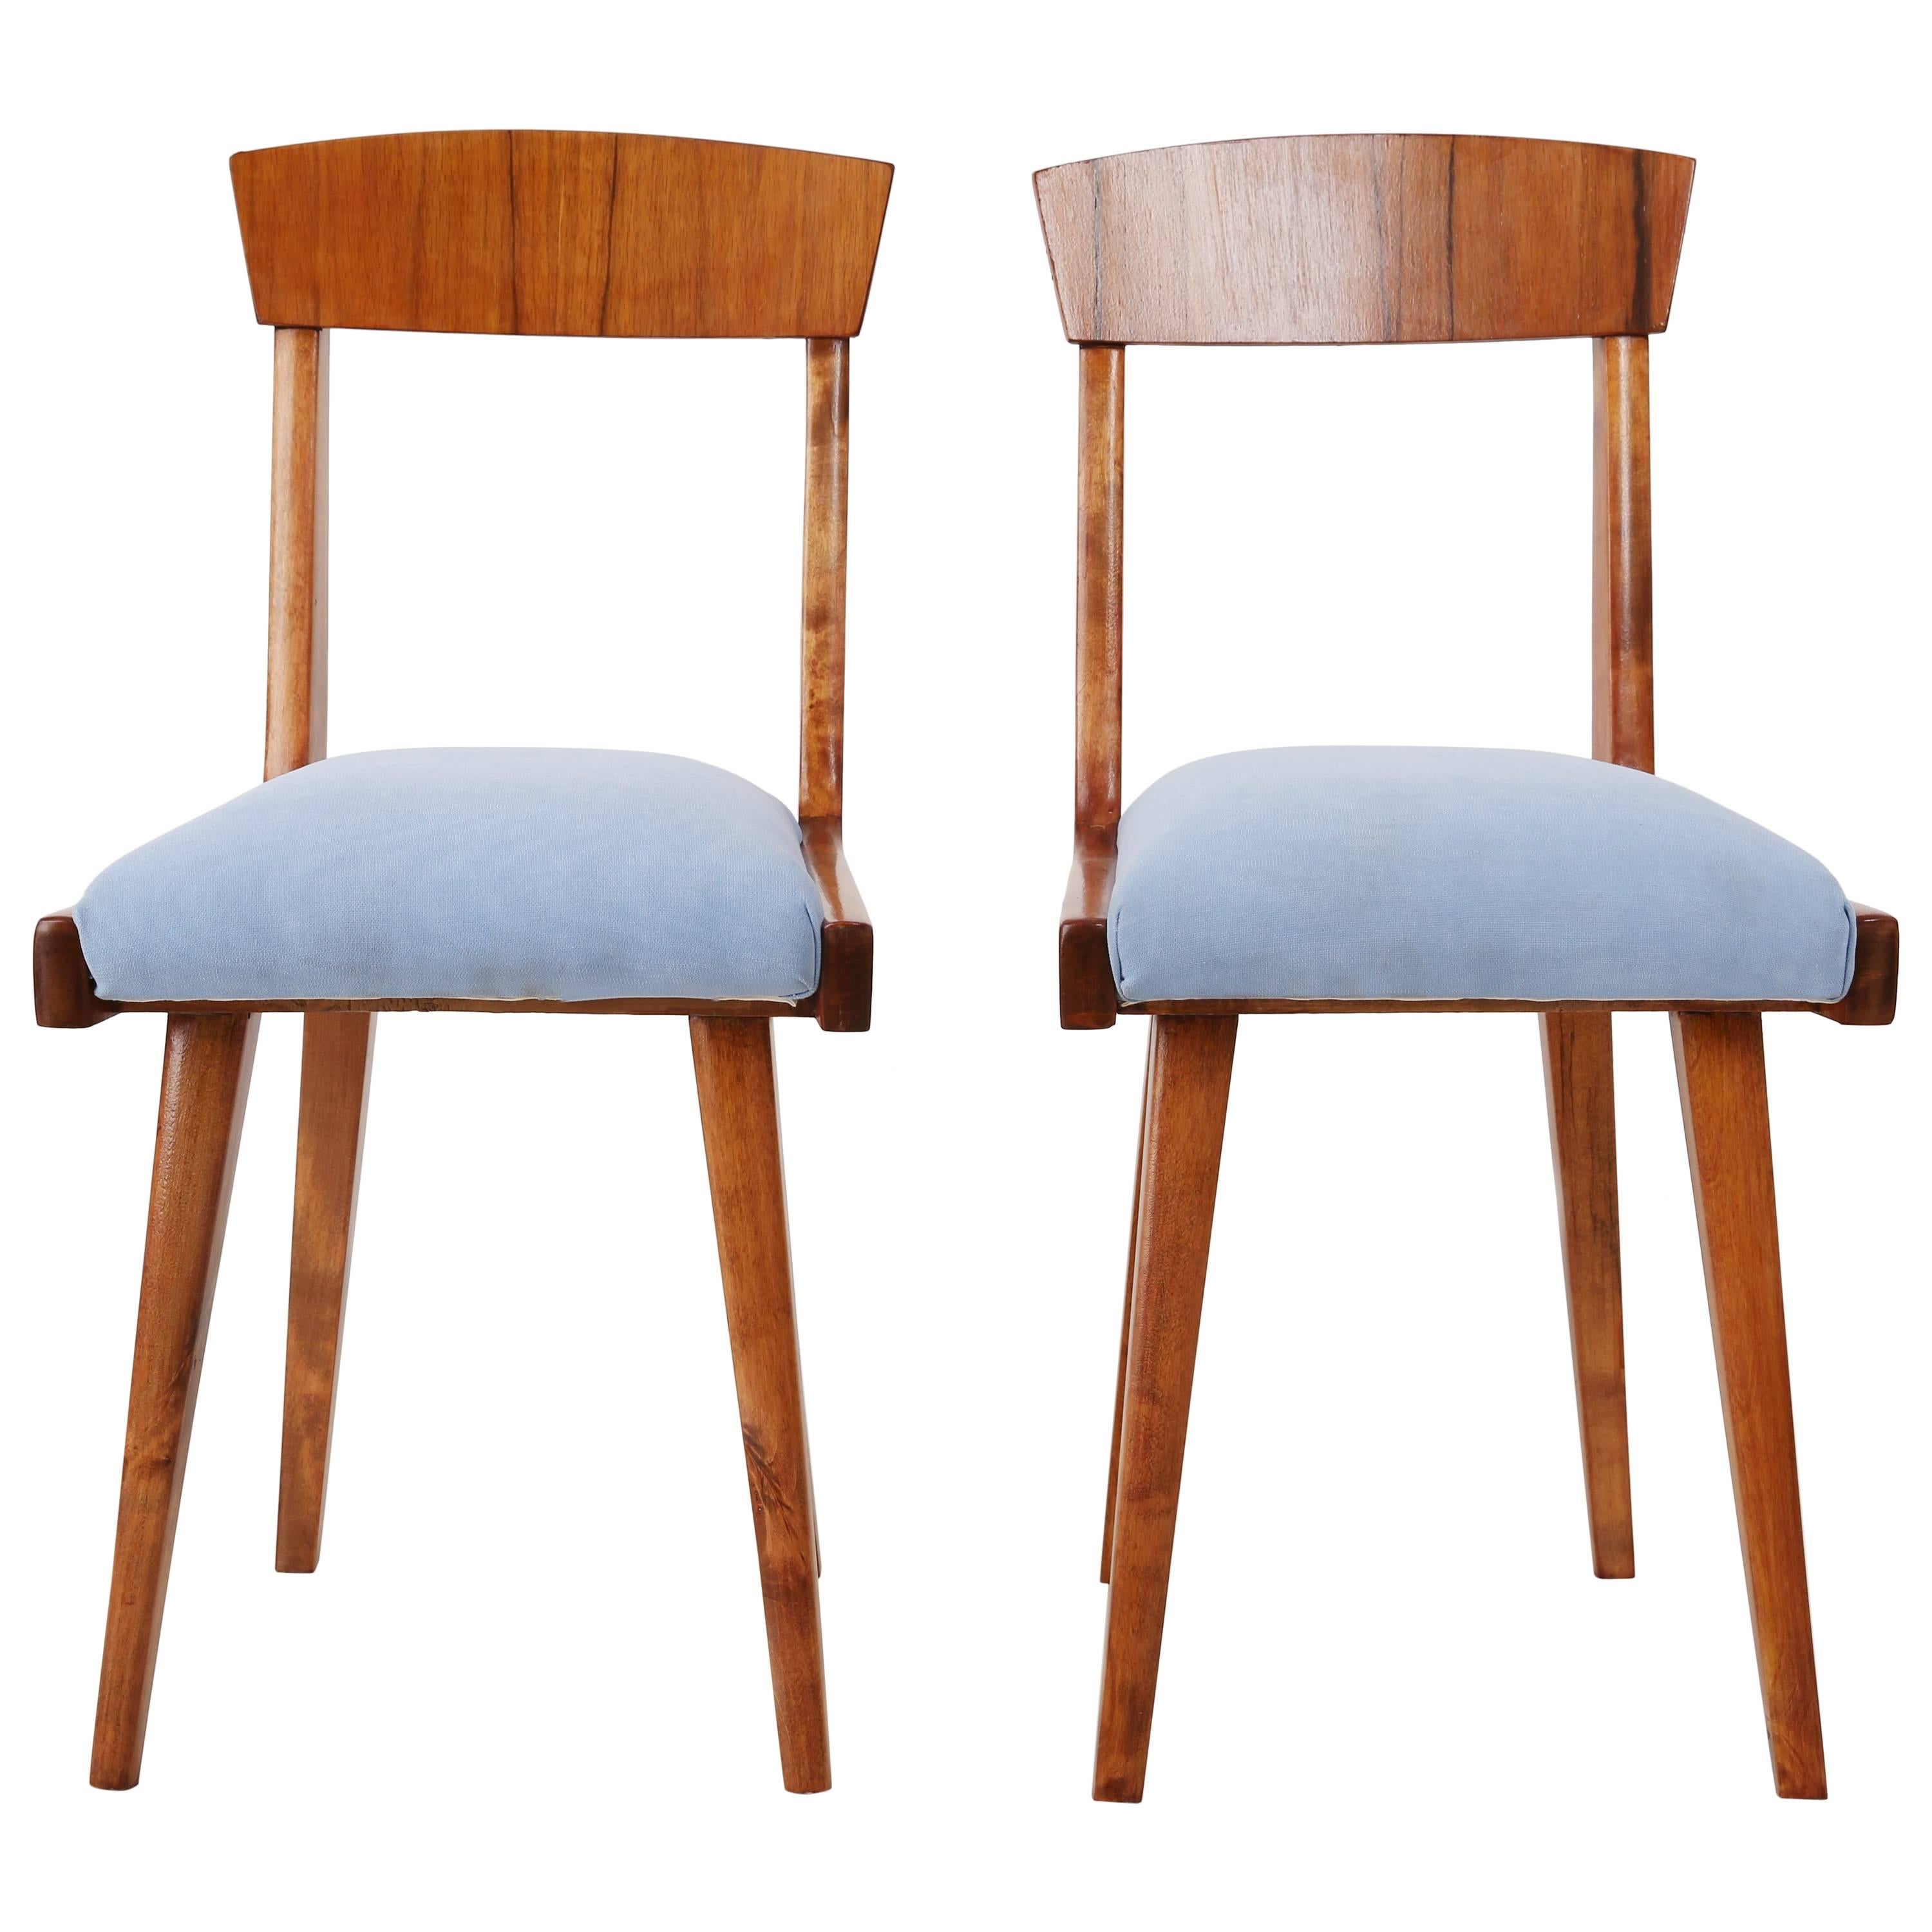 Set of Two Mid Century Baby Blue Velvet and Medium Wood Chairs, Europe, 1960s For Sale